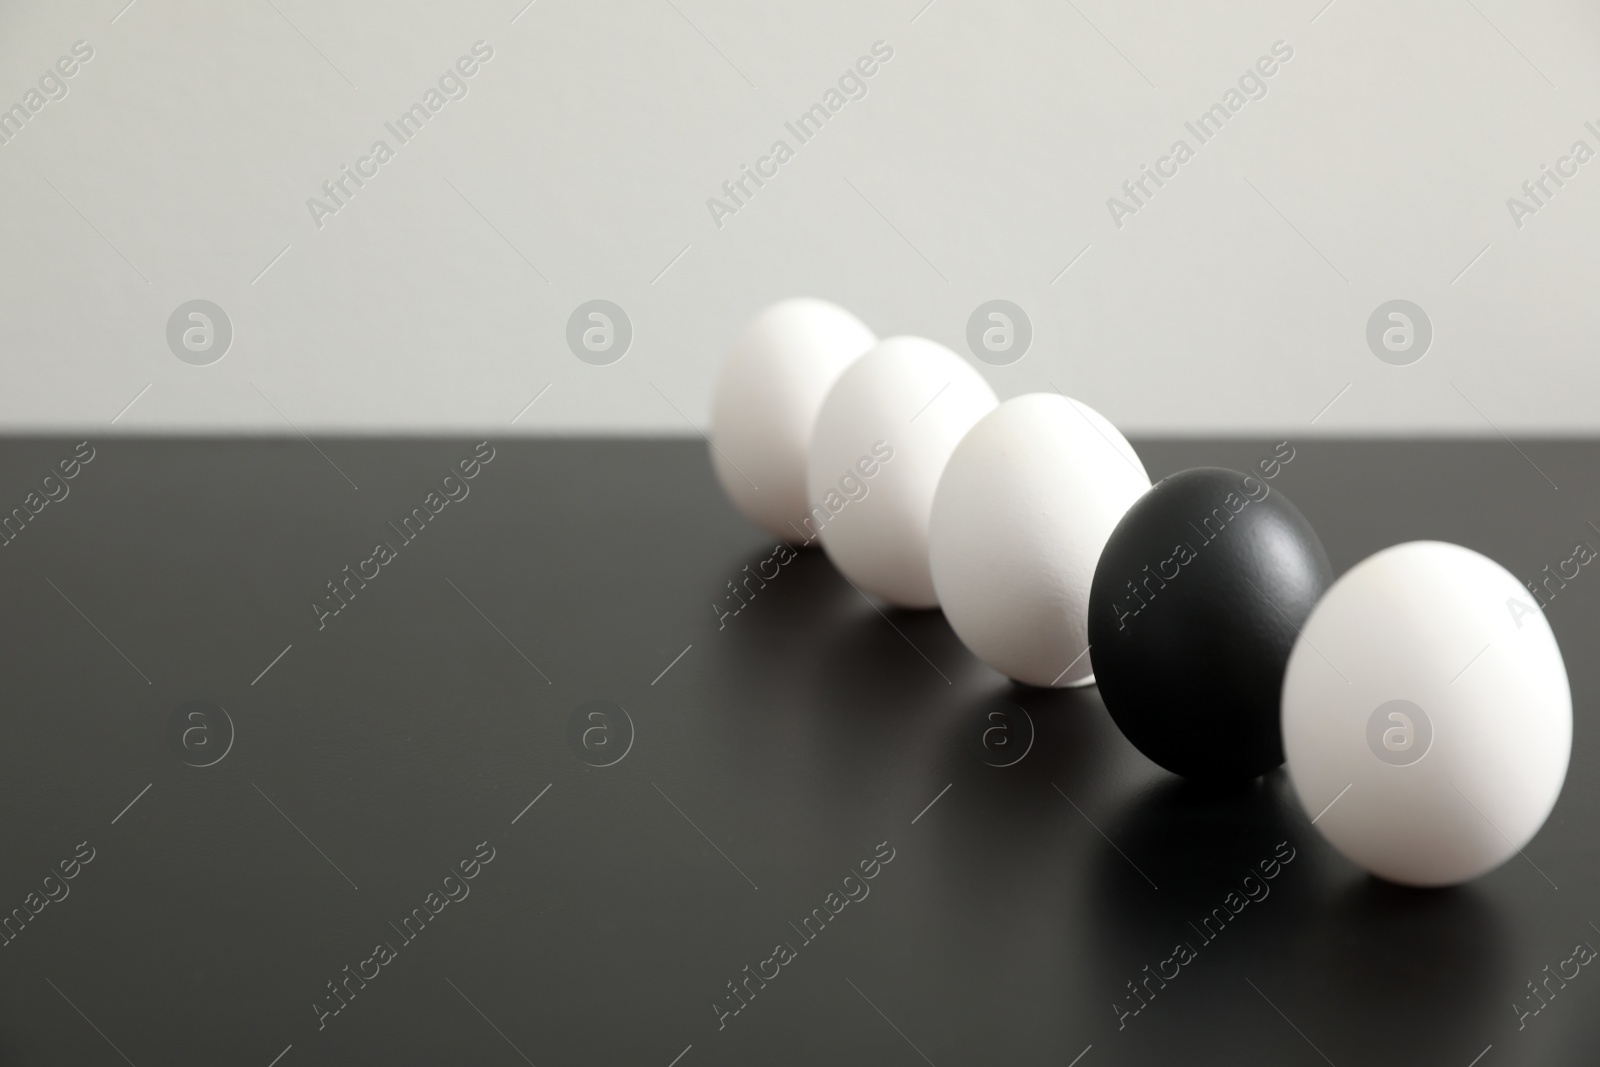 Photo of Black egg among others on table. Space for text